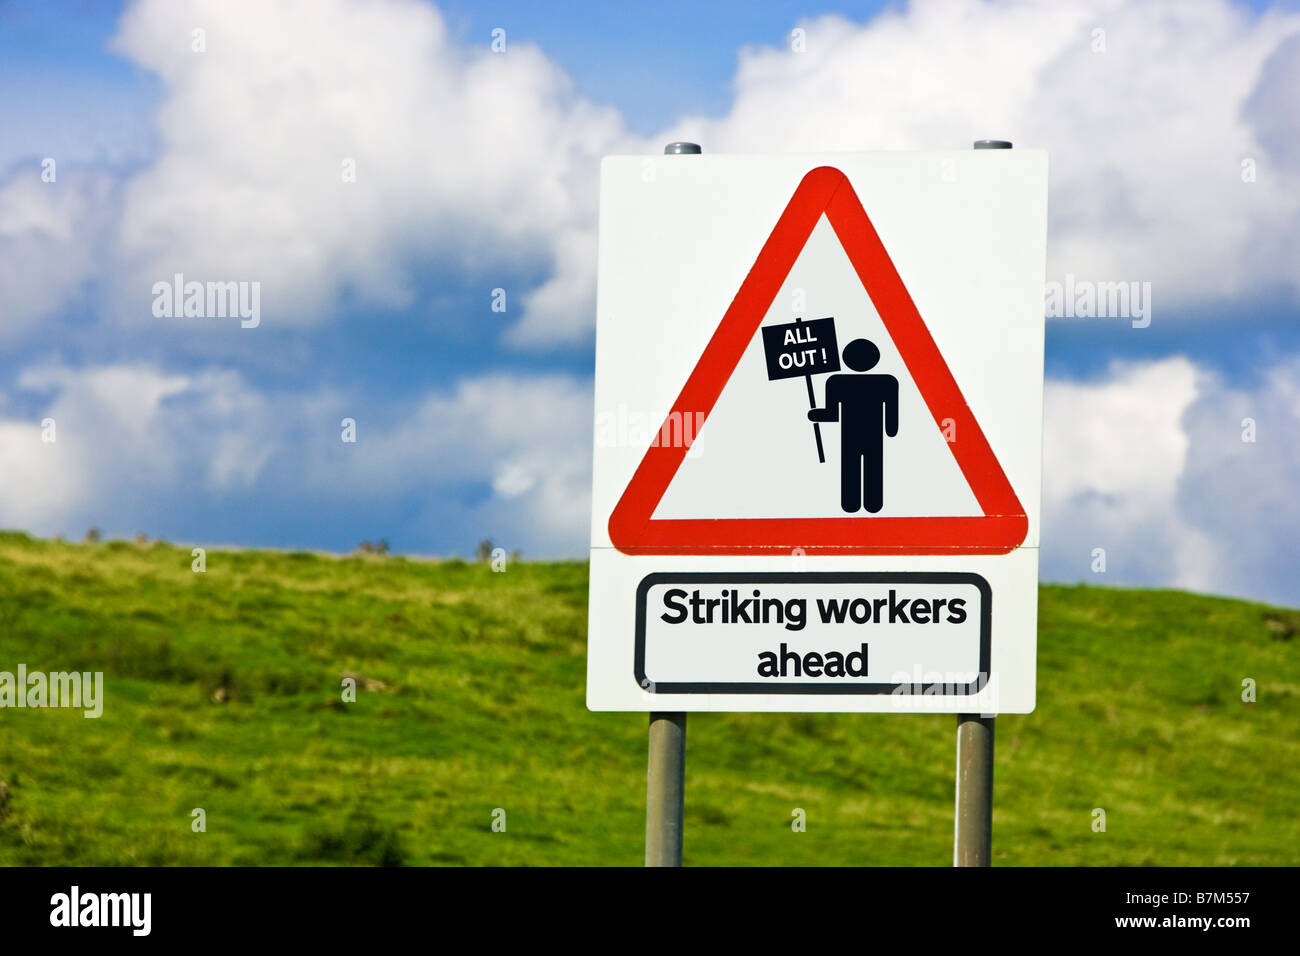 Industrial action and protests warning sign concept - Striking Workers Ahead, UK Stock Photo